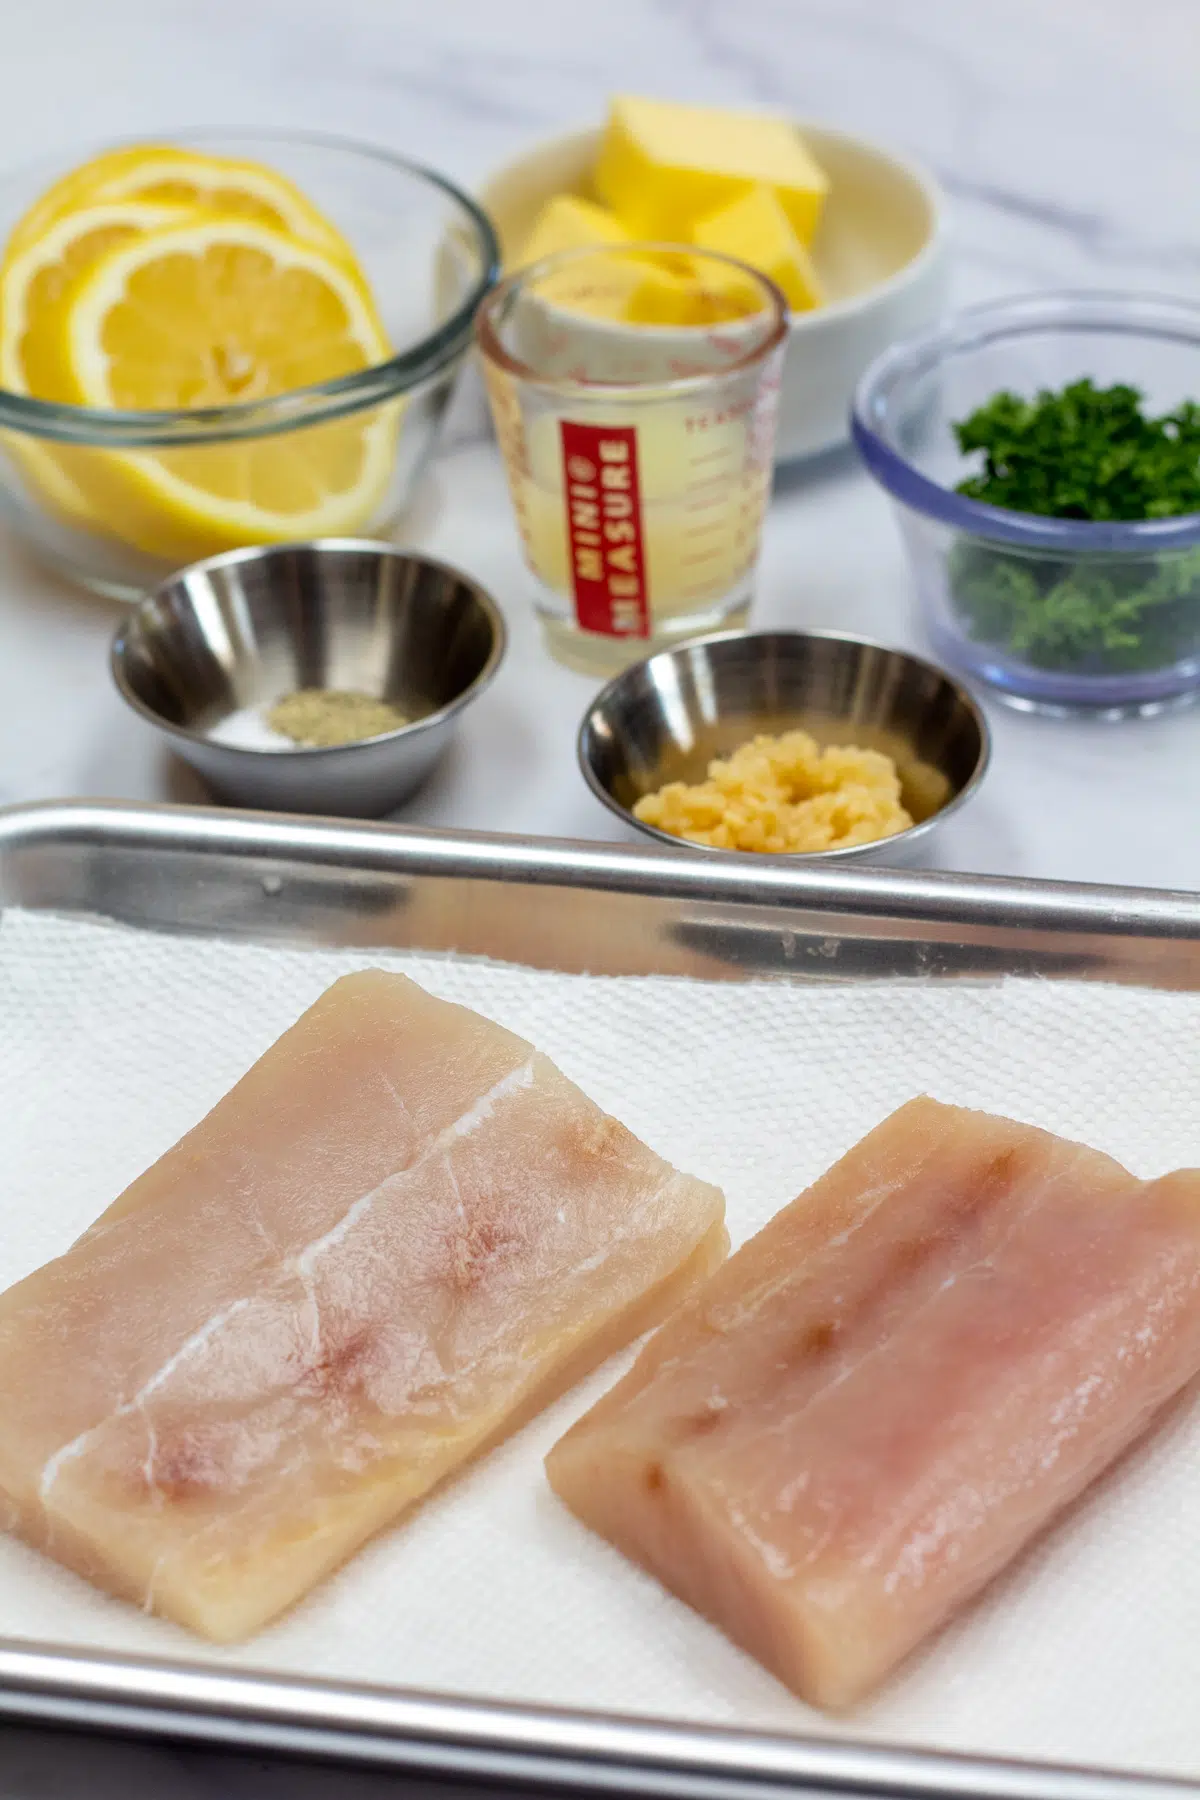 Tall photo showing ingredients needed for baked mahi mahi.